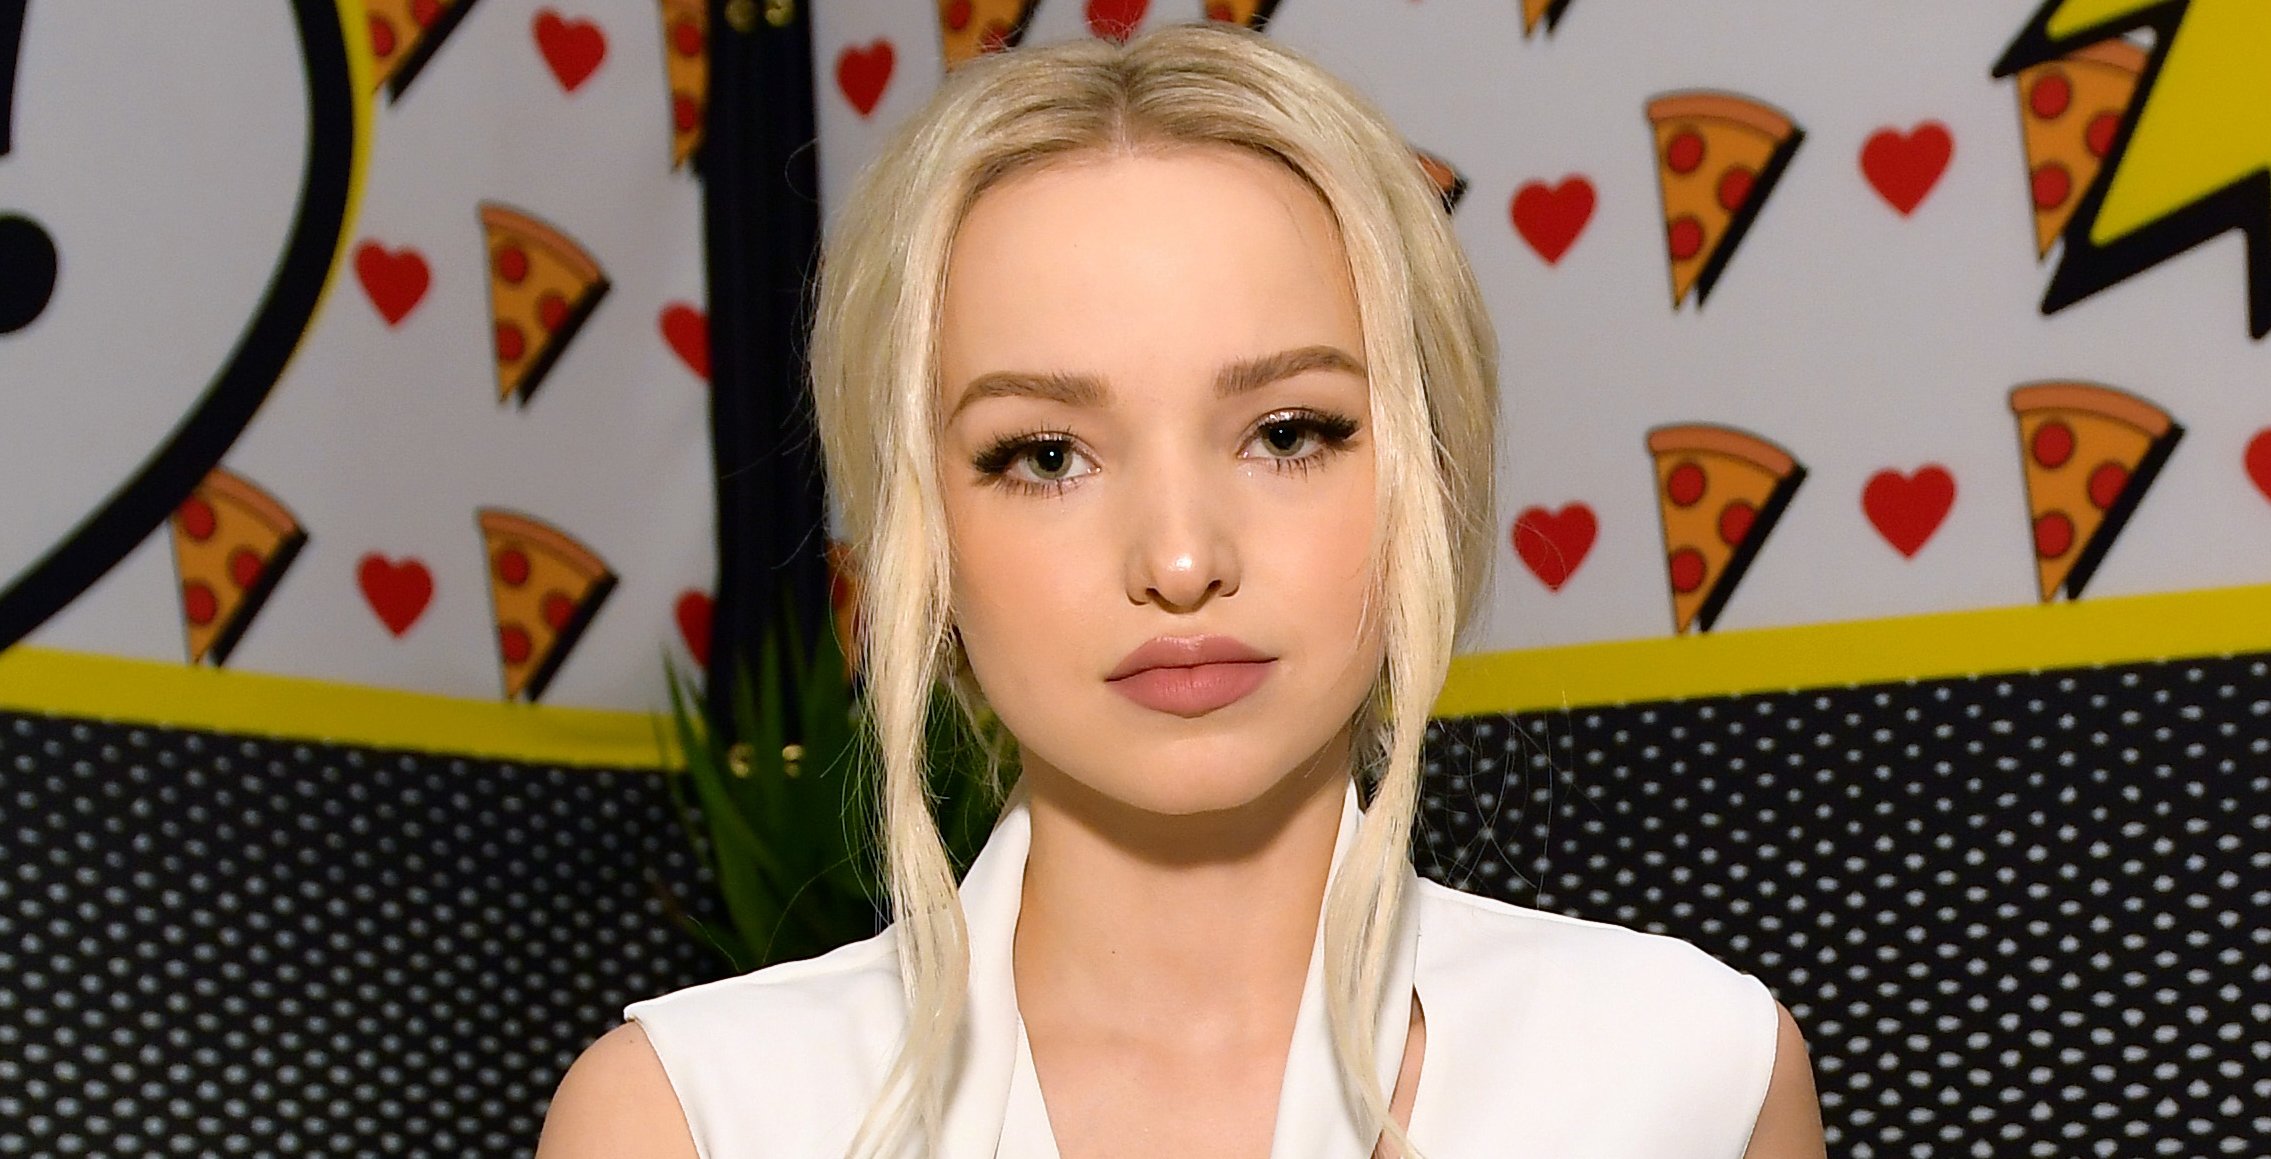 Dove Cameron Shares a Moody Quote on Instagram.